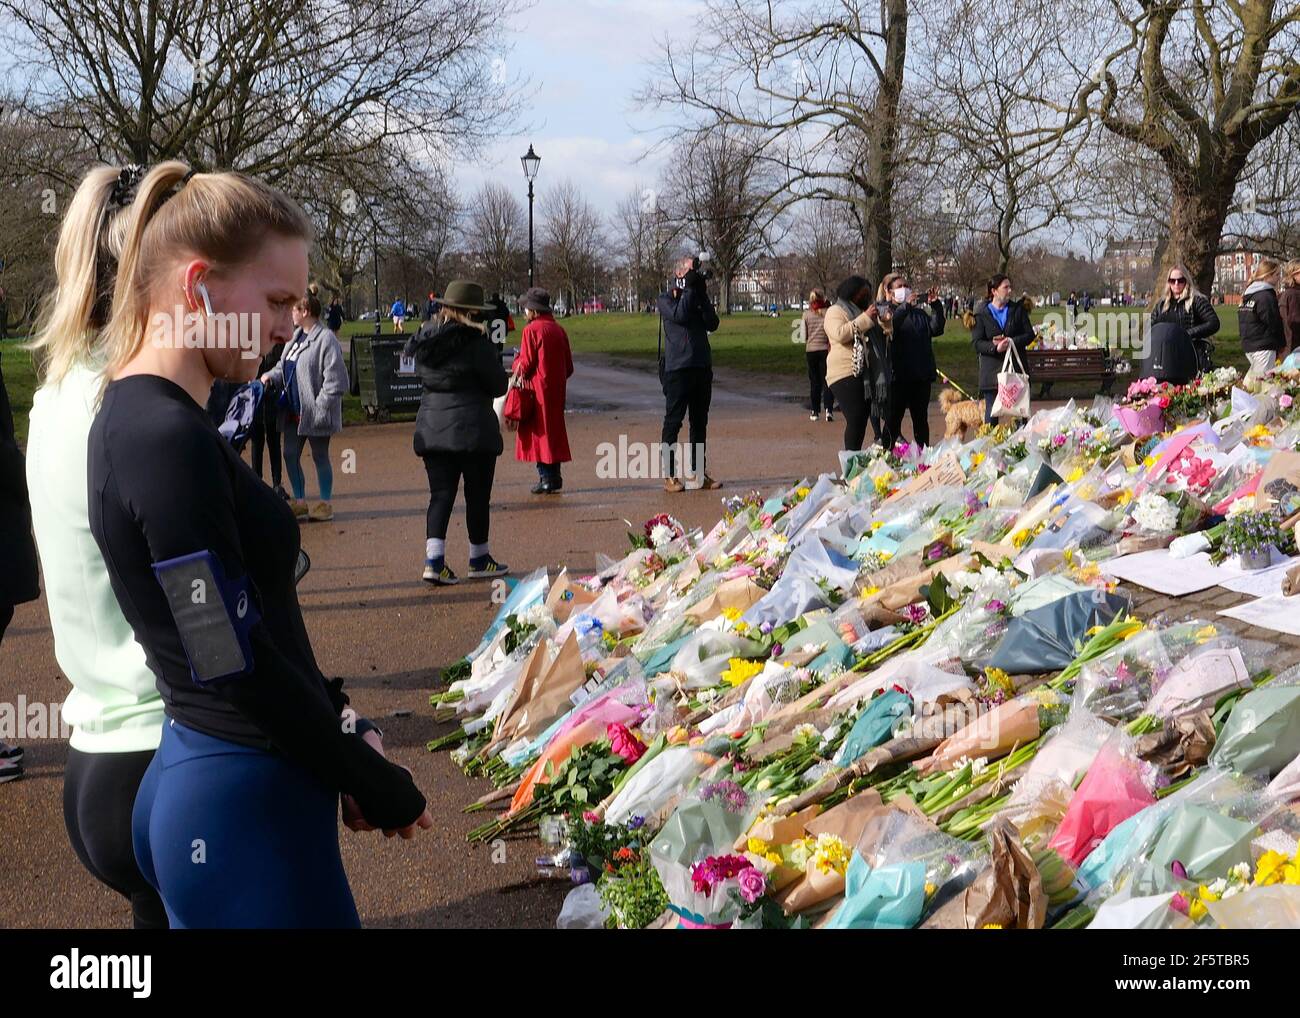 At around 21:00 GMT on 3 March 2021, Everard left the house of a friend near Clapham Junction to the west of Clapham Common.[4][7][8] She walked across the common, along the A205 South Circular Road, en route to her home.[7][3][9] She spoke to her boyfriend on her mobile phone for about fifteen minutes and agreed to meet him the next day.[3] At 21:28, she was seen on doorbell camera footage on Poynders Road[10] and four minutes later on the dashcam of a passing police car.[11][4][3] CCTV footage from a bus passing her route at 21:35 also assisted the investigation. Stock Photo